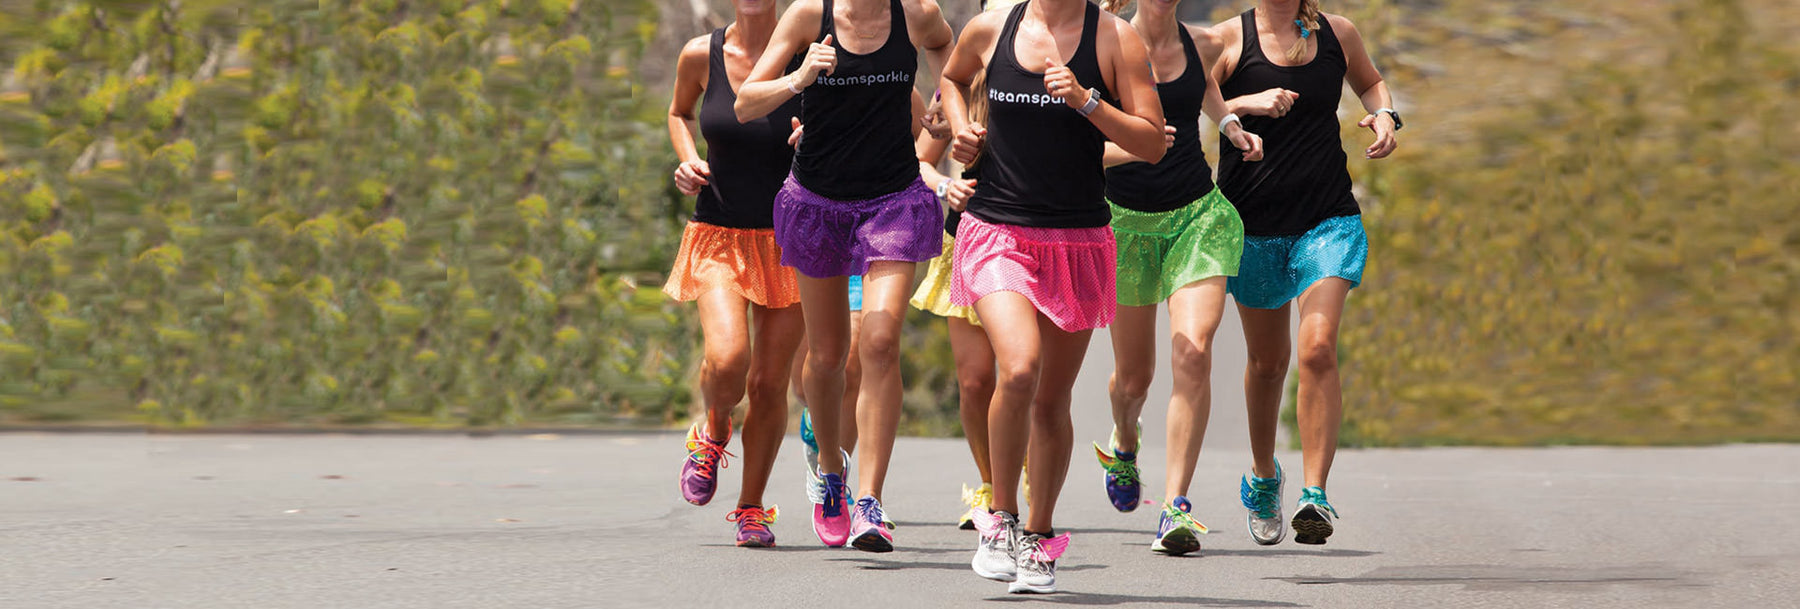 Sparkle Athletic Running Gear and Skirt Outfits